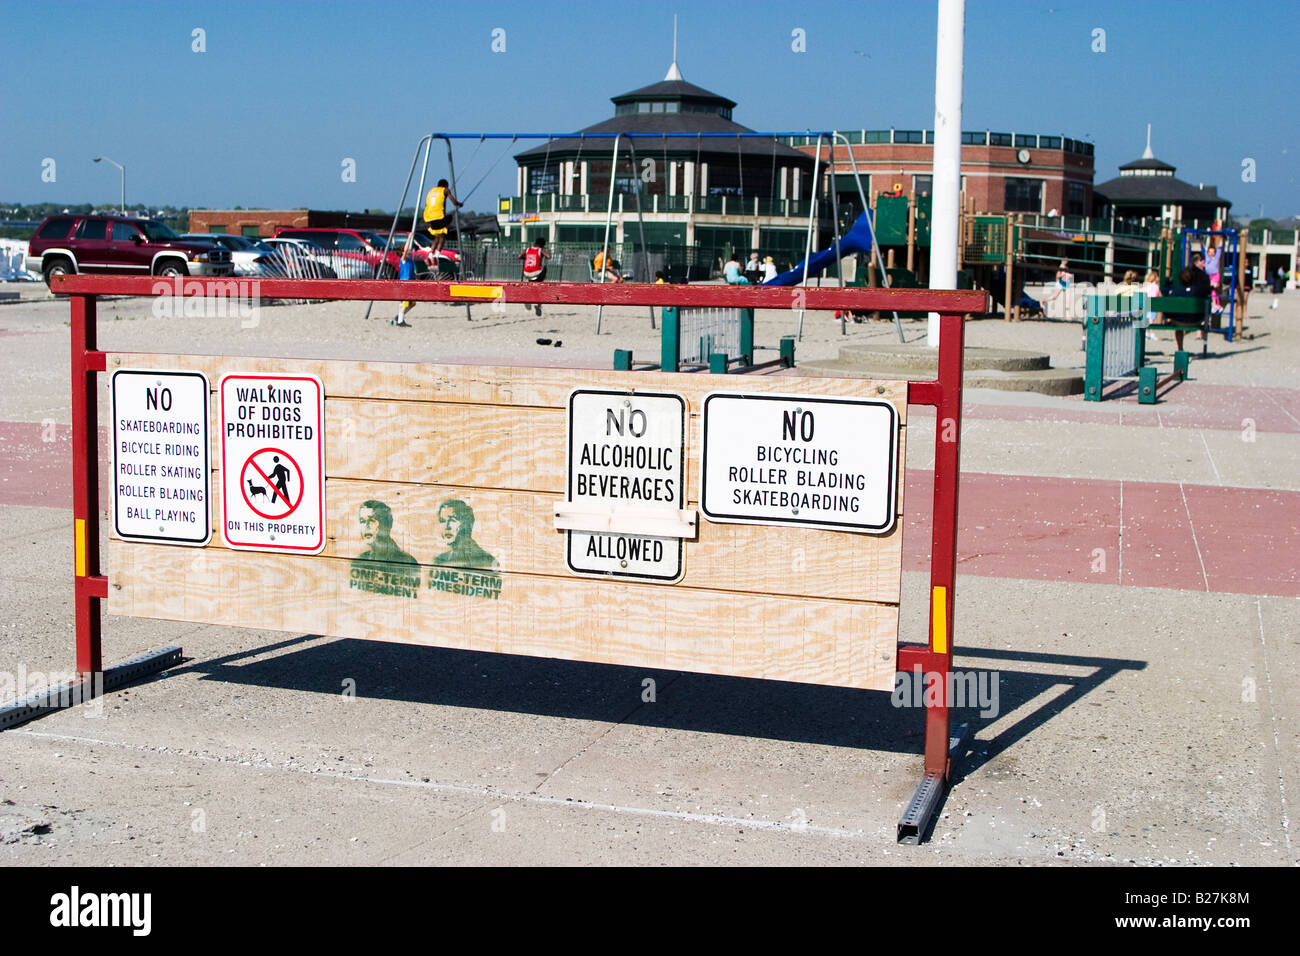 Walking of dogs is prohibited and graffiti on a barrier next to a playground Stock Photo